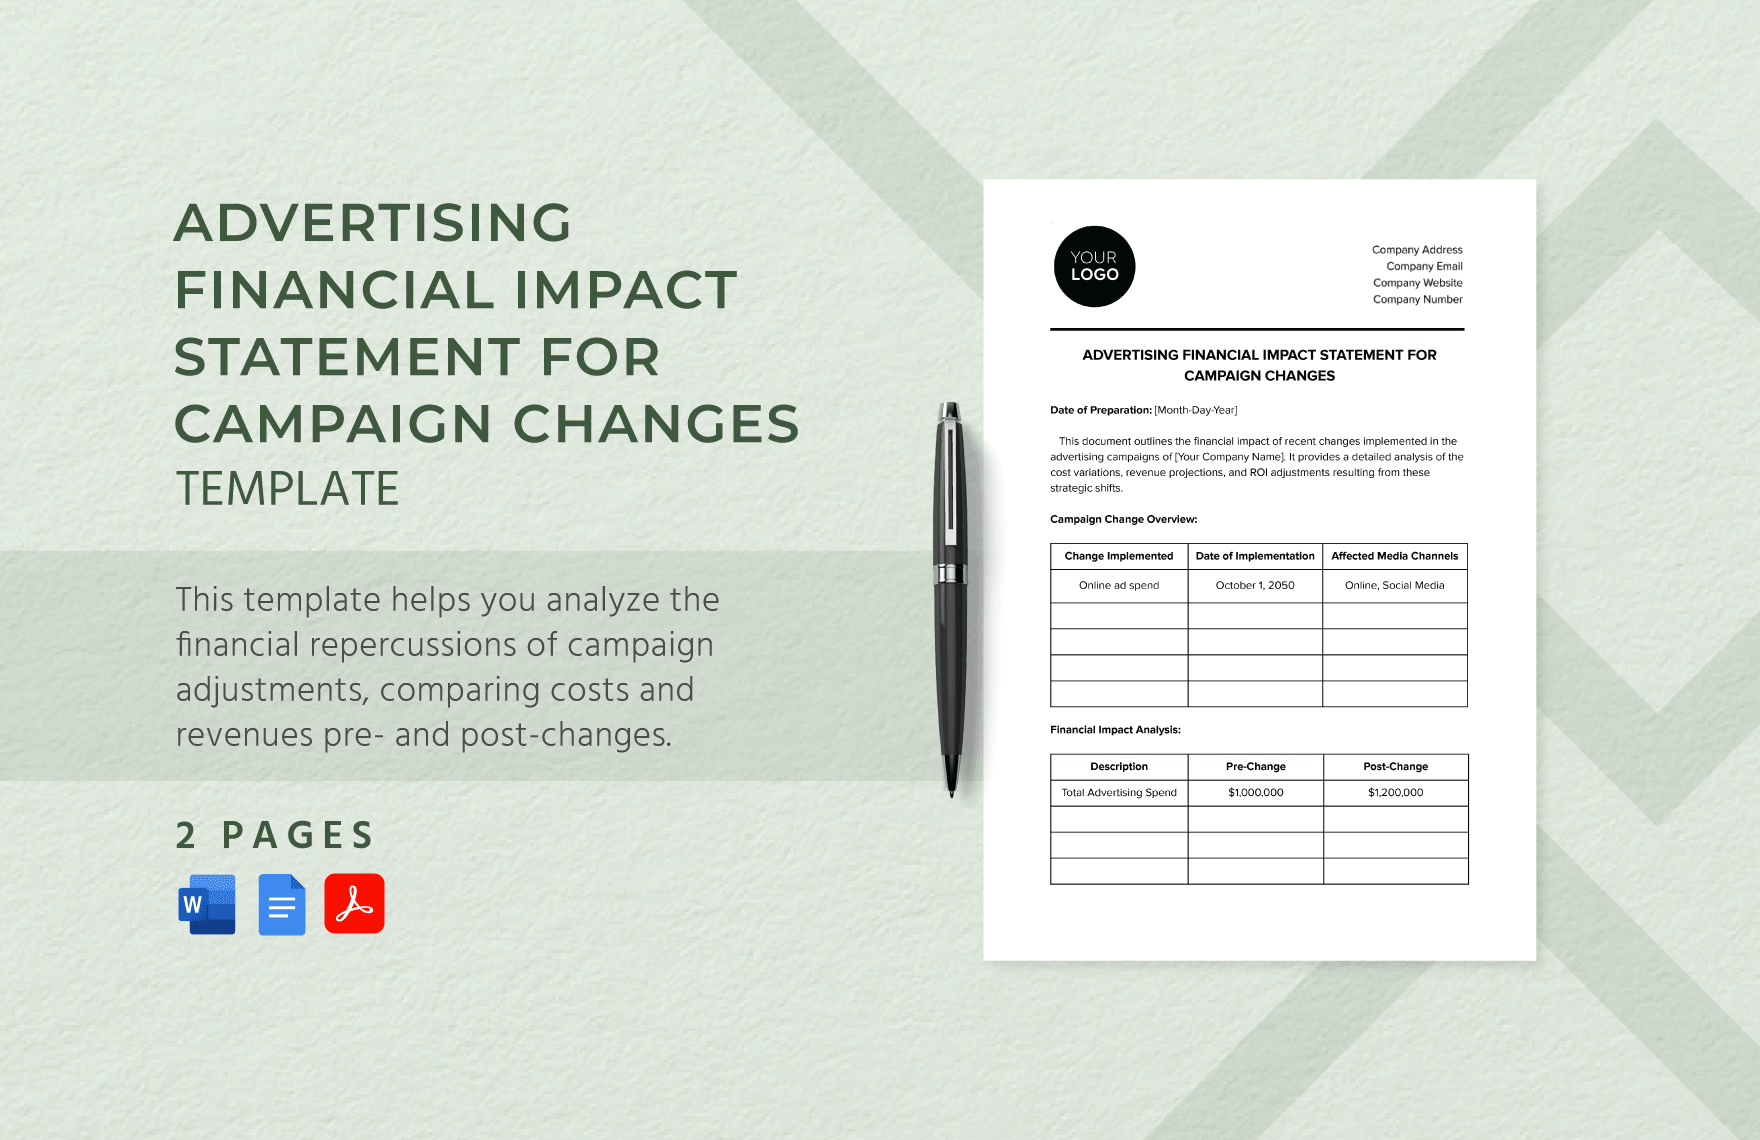 Advertising Financial Impact Statement for Campaign Changes Template